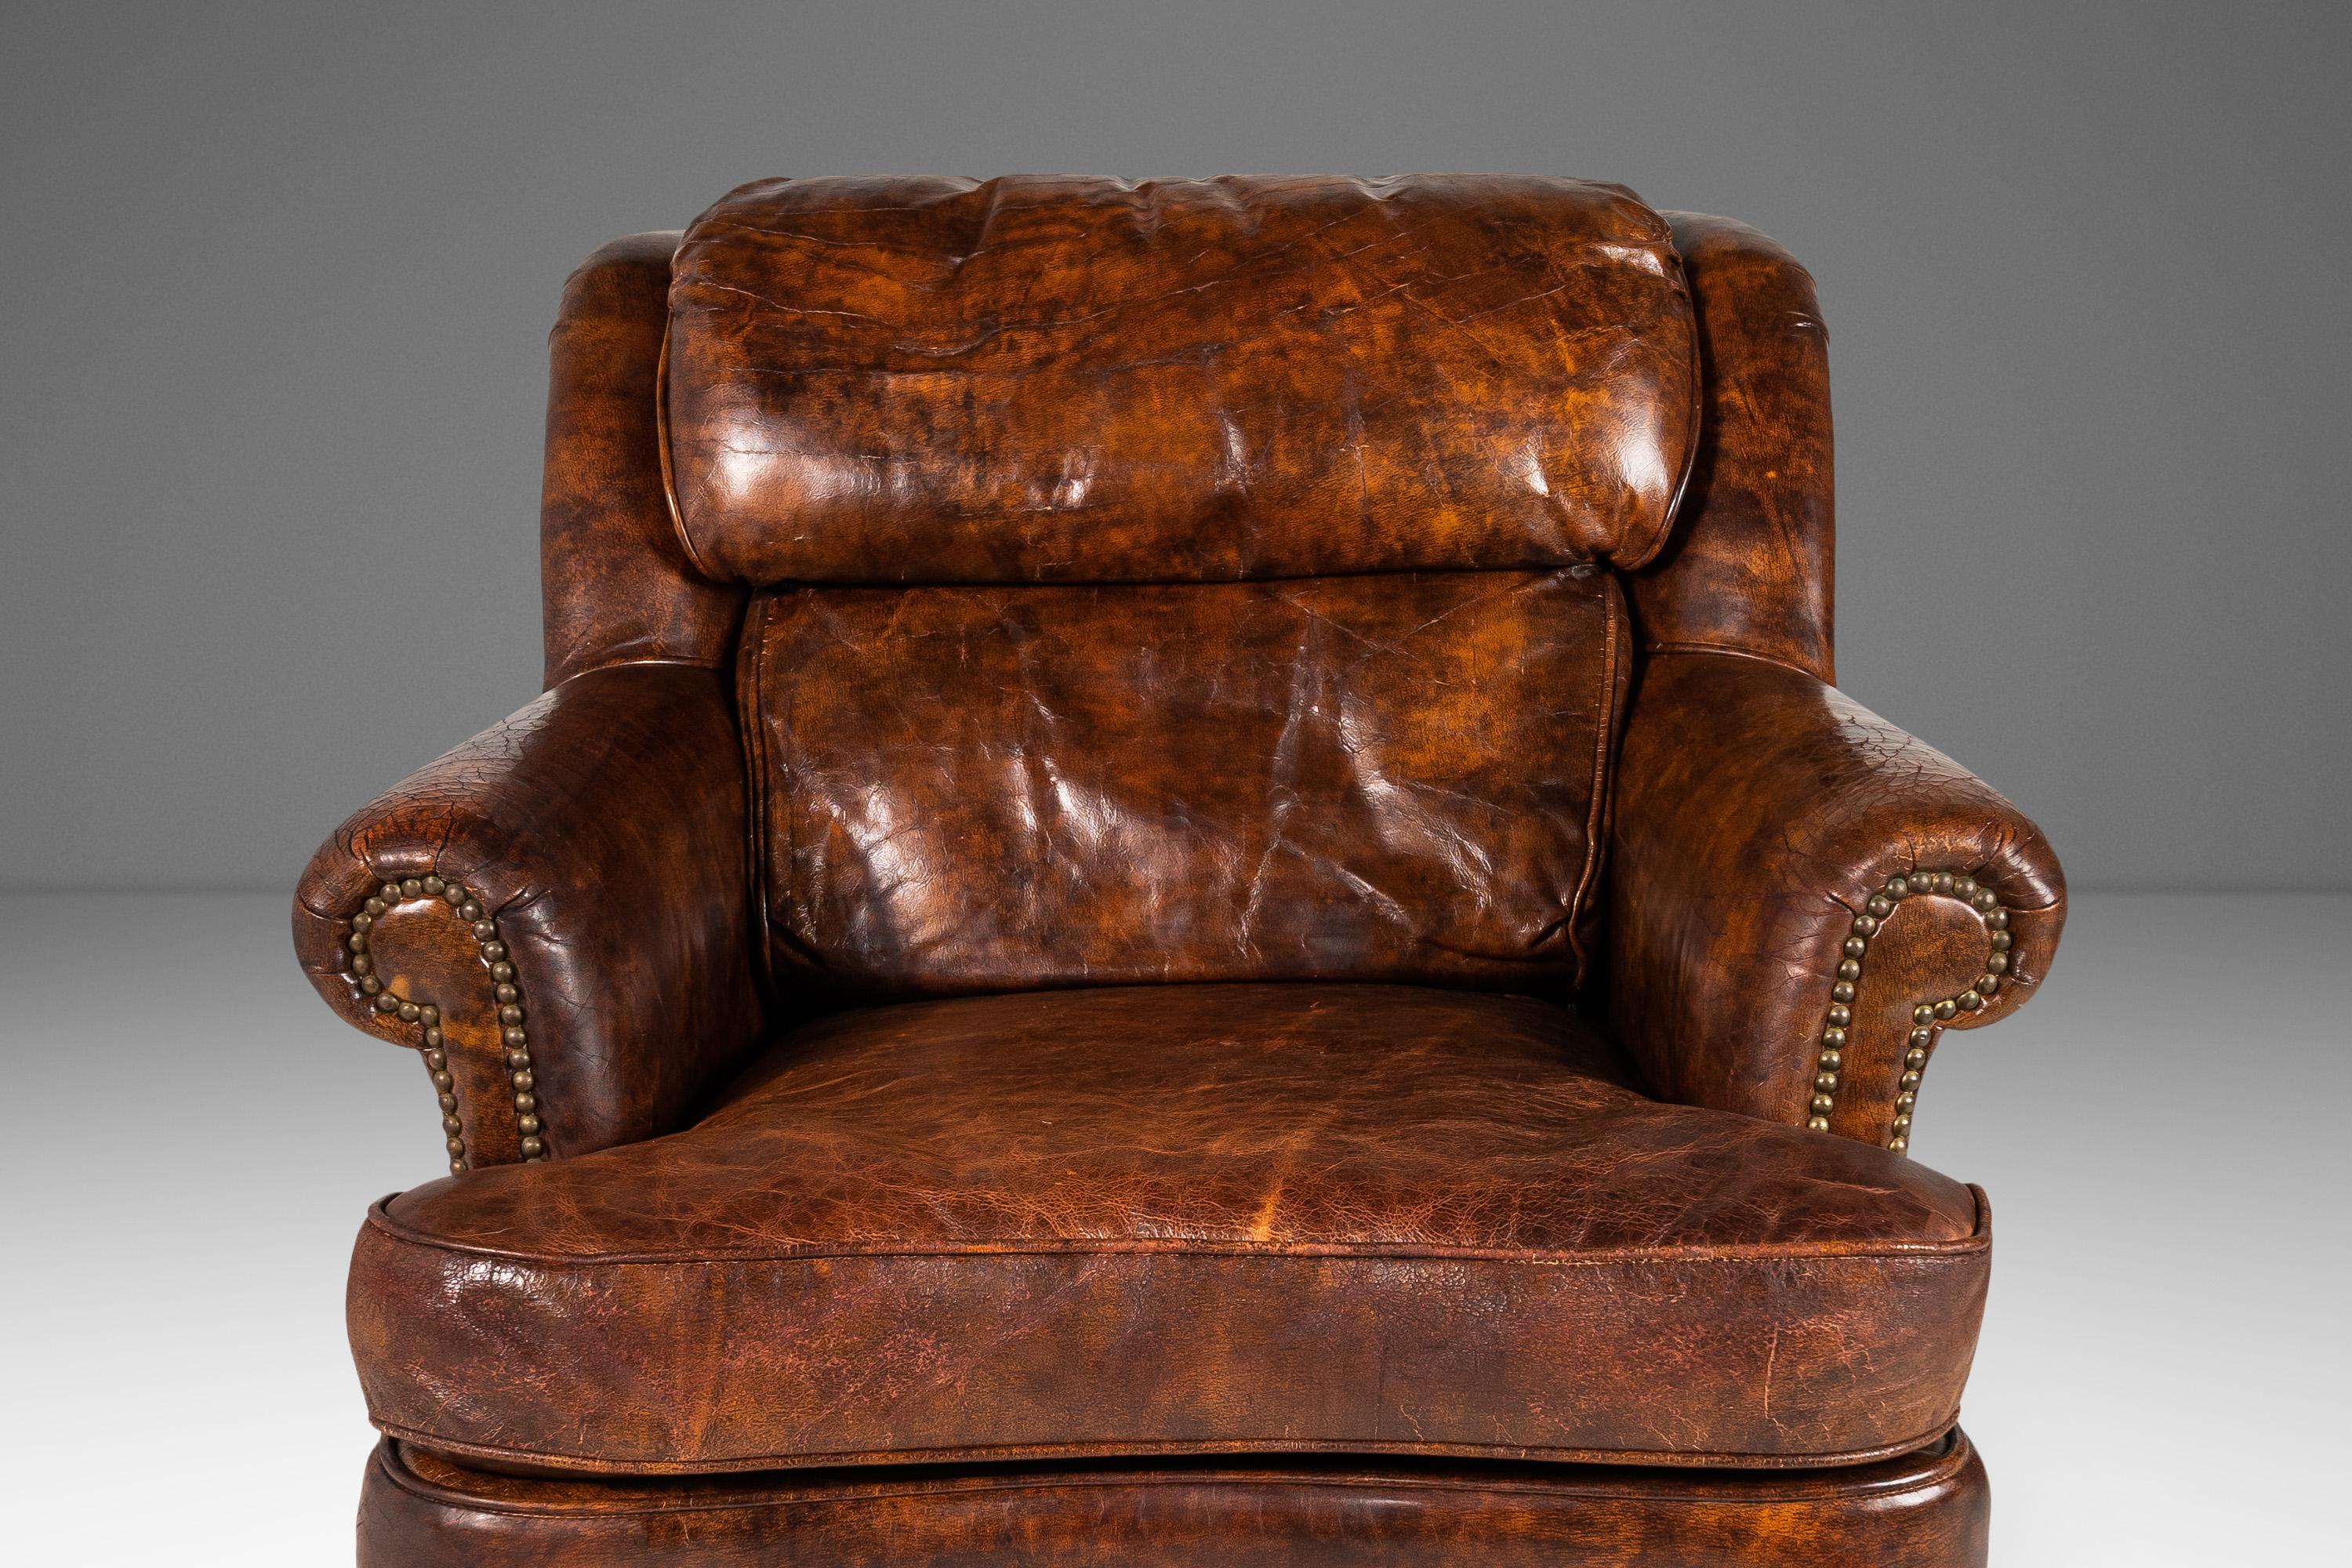 Mid-20th Century Patinaed French Club Chair Cigar Chair & Ottoman in Distressed Leather c. 1940s For Sale